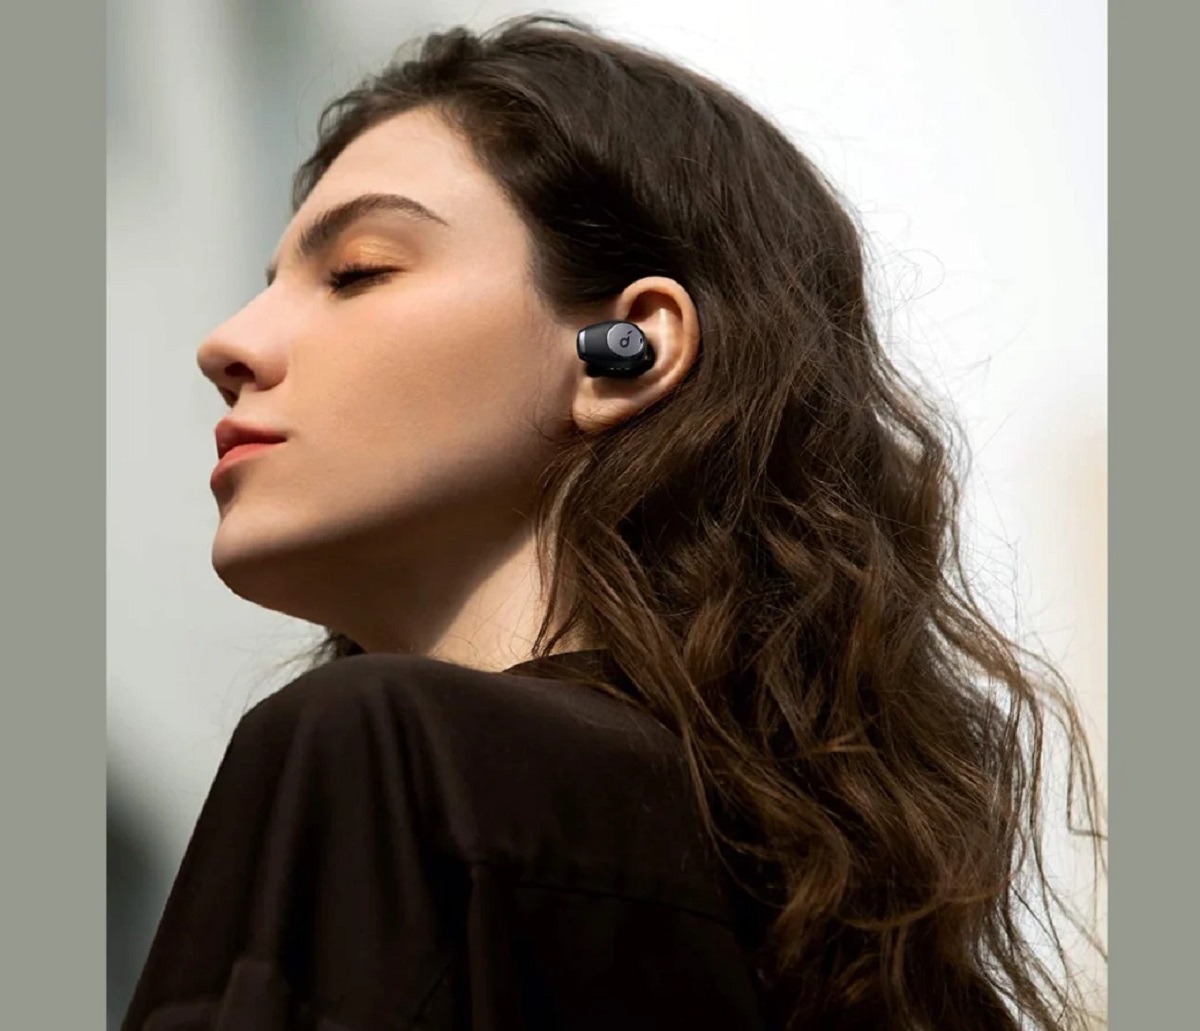 How To Hook Up Wireless Earbuds